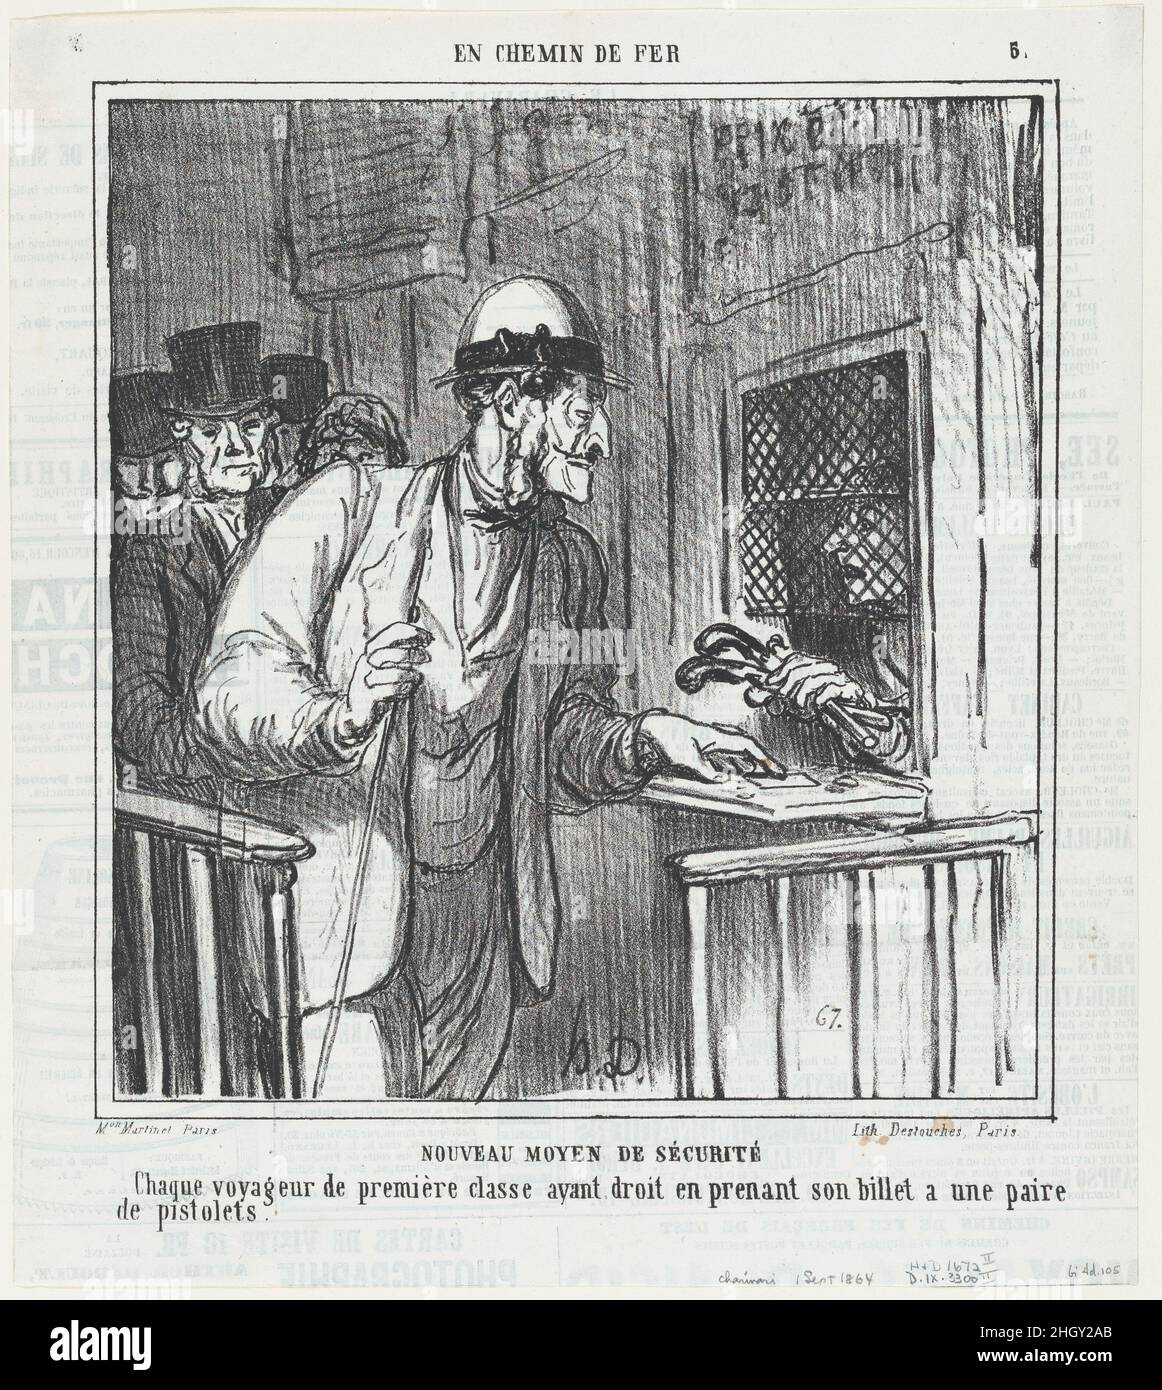 New security measures, from 'On the train,' published in Le Charivari, September 1, 1864 September 1, 1864 Honoré Daumier NEW SECURITY MEASURES. Each first class traveller, when buying a ticket, has the right to bring two pistols.. New security measures, from 'On the train,' published in Le Charivari, September 1, 1864. 'On the train' (En chemin de fer). Honoré Daumier (French, Marseilles 1808–1879 Valmondois). September 1, 1864. Lithograph on newsprint; second state of two (Delteil). Aaron Martinet (French, 1762–1841). Prints Stock Photo